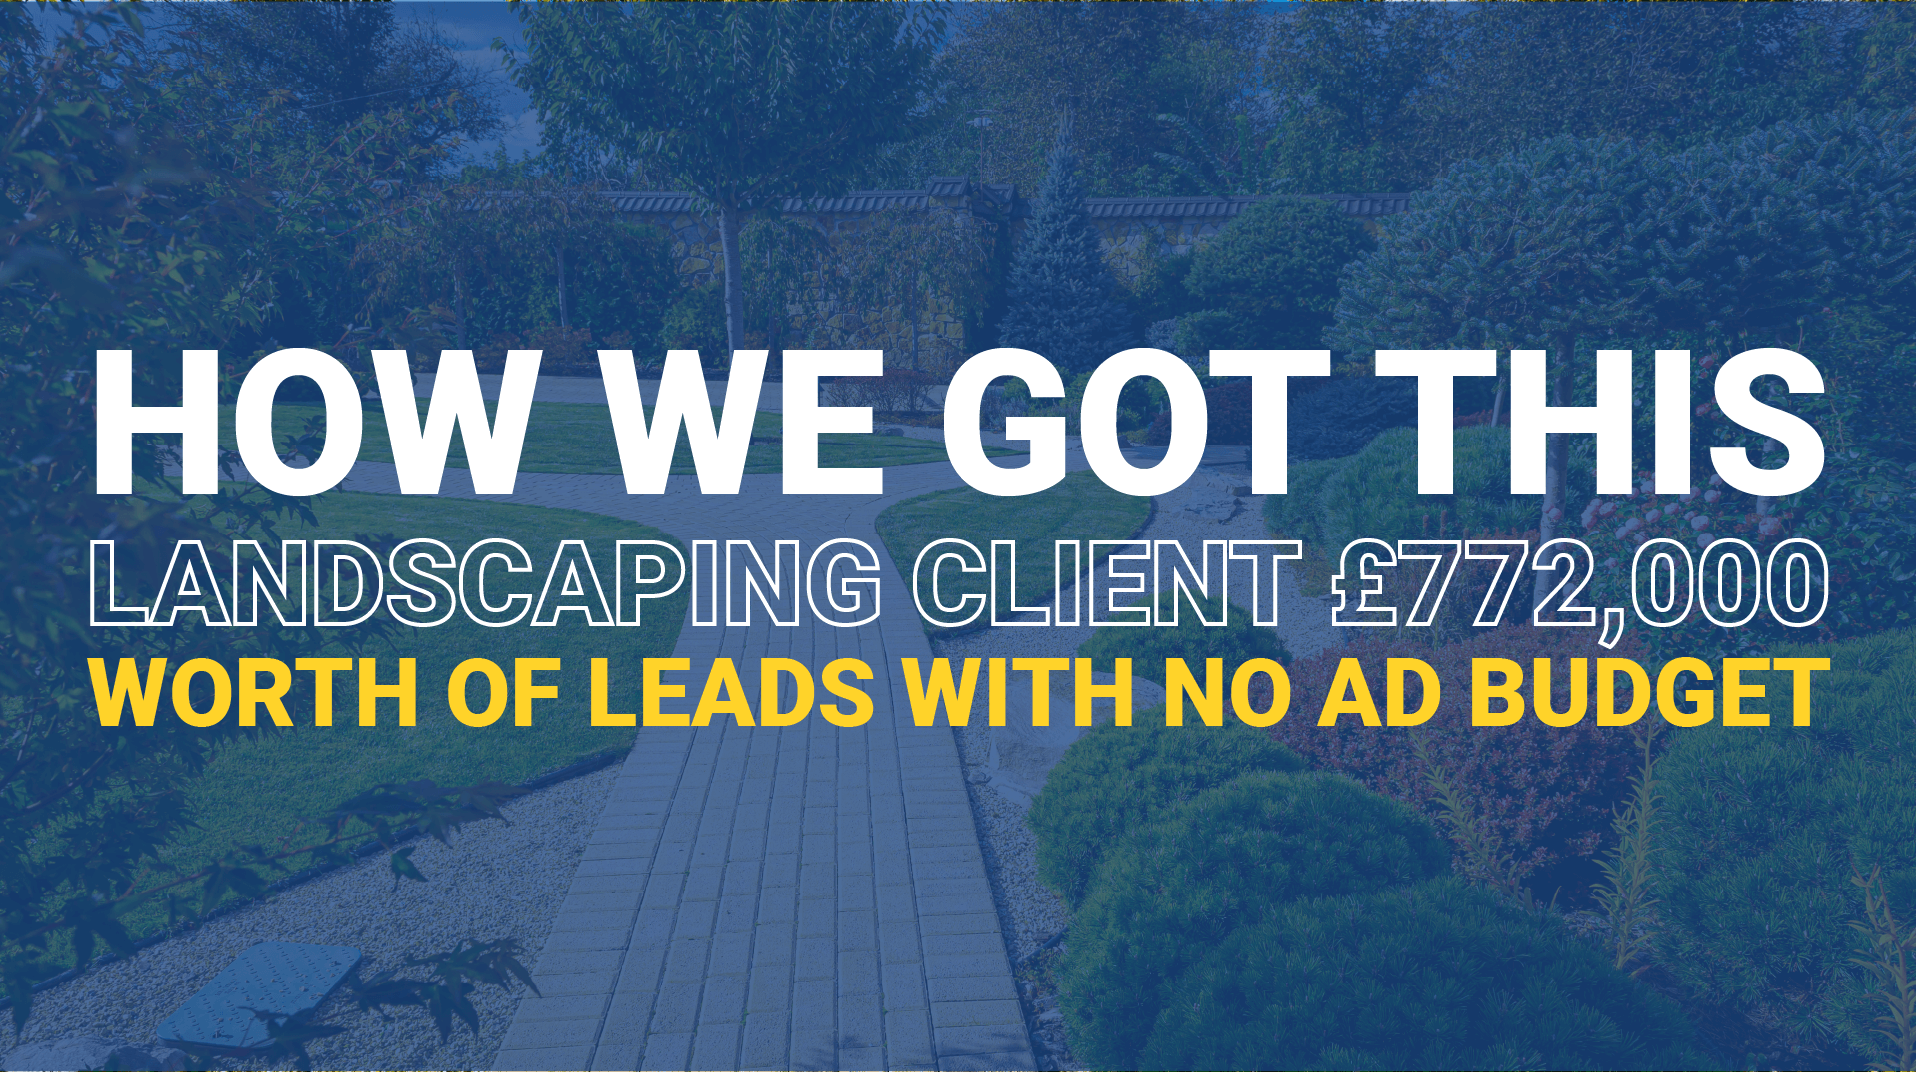 Case study: Getting Landscaping Client £772,000 Worth of Leads